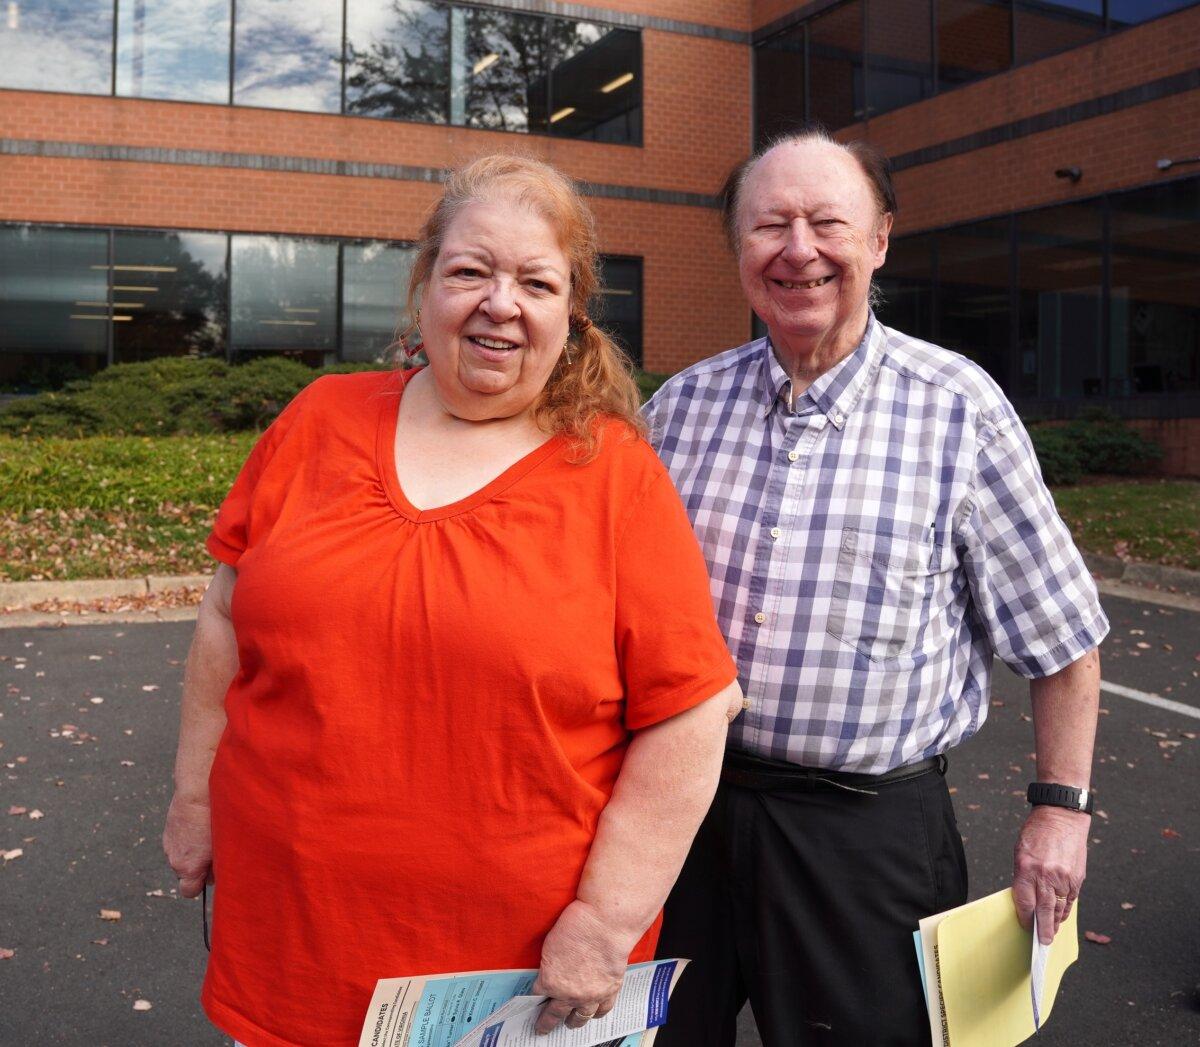 Bobbi and Howard Holcombe outside the Loudoun County Office of Elections in Leesburg, Va., on Nov. 4, 2023. (Terri Wu/The Epoch Times)